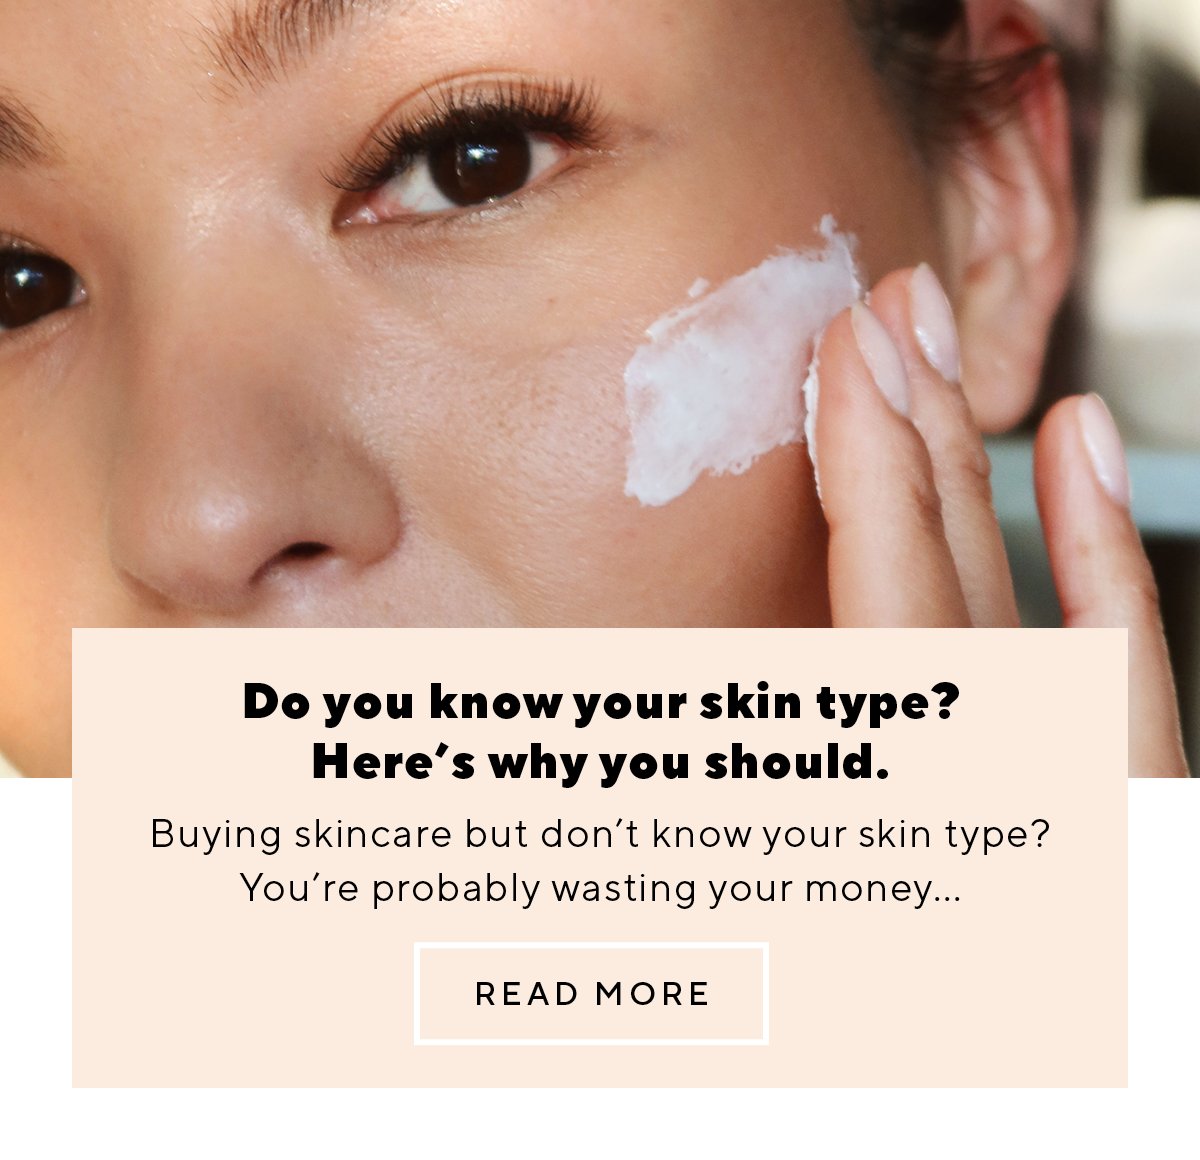 Do you know your skin type? Here’s why you should.